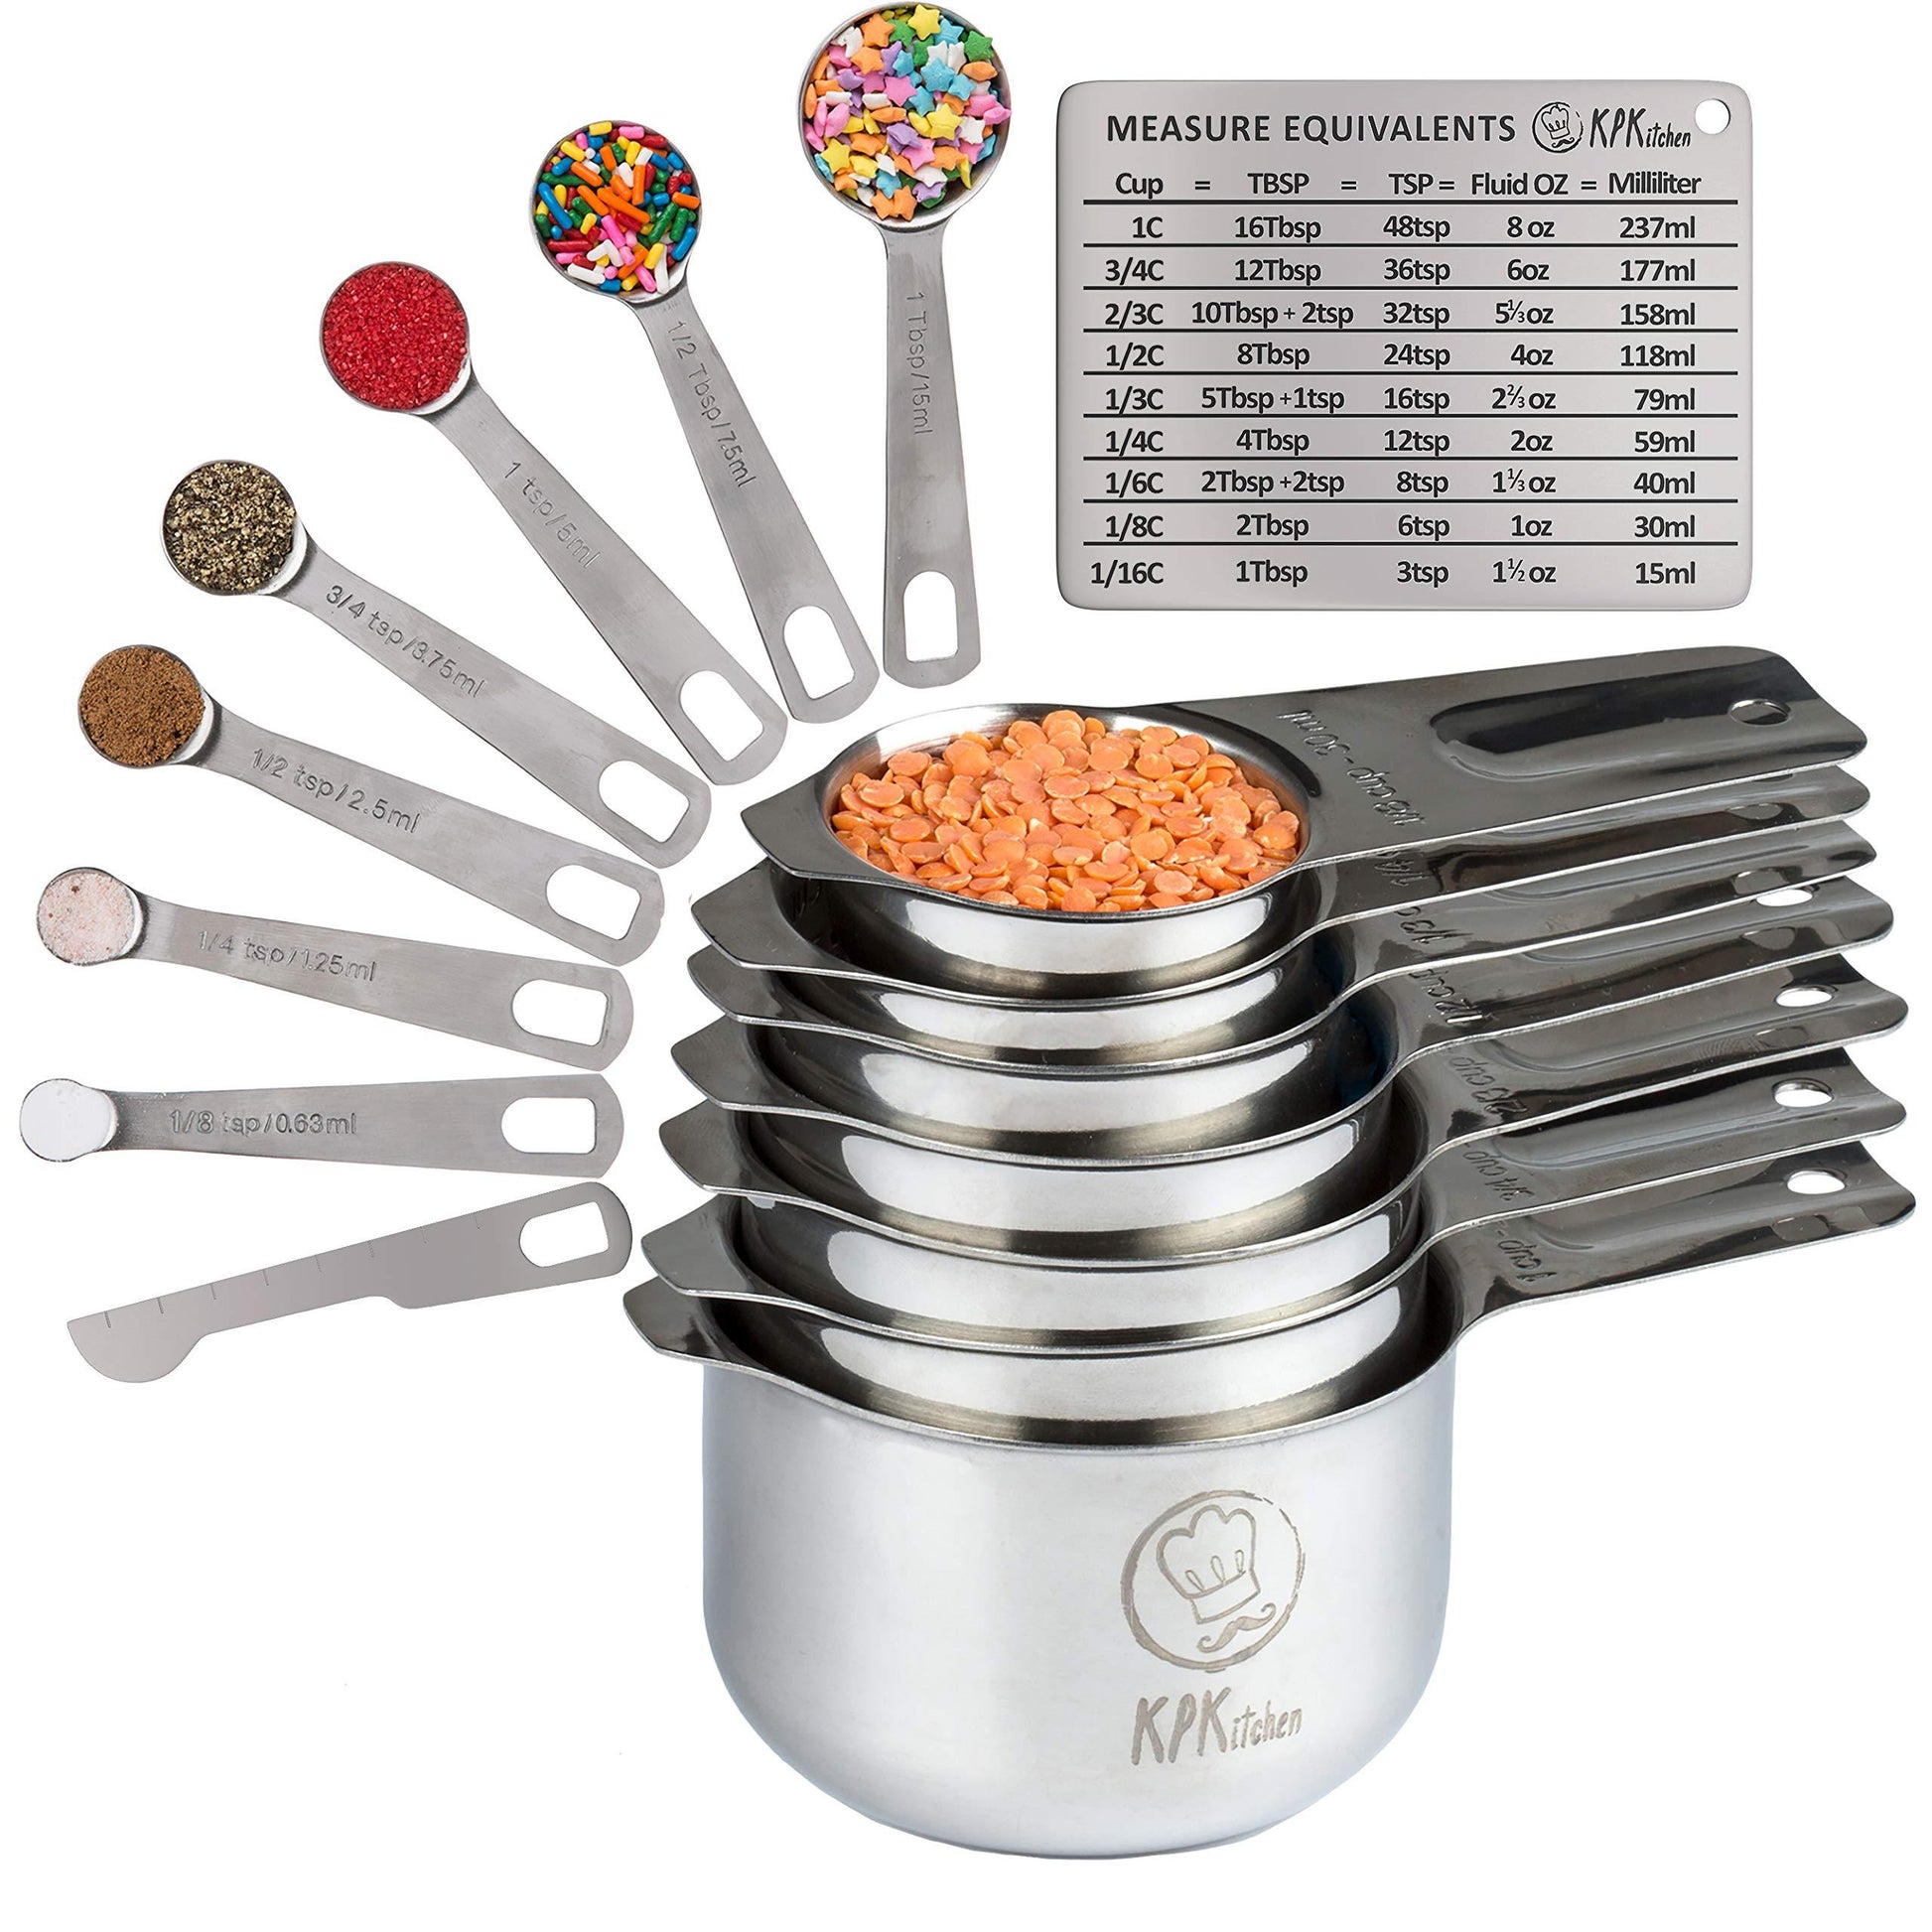 Stainless Steel Measuring Cups and Spoons Set of 16-7 Cup & 7 Spoon + Conversion Chart & Leveler - Kitchen Measuring Spoons and Cups - Dry Measure Cups Stainless Steel & Baking Metal Measuring Cups - CookCave